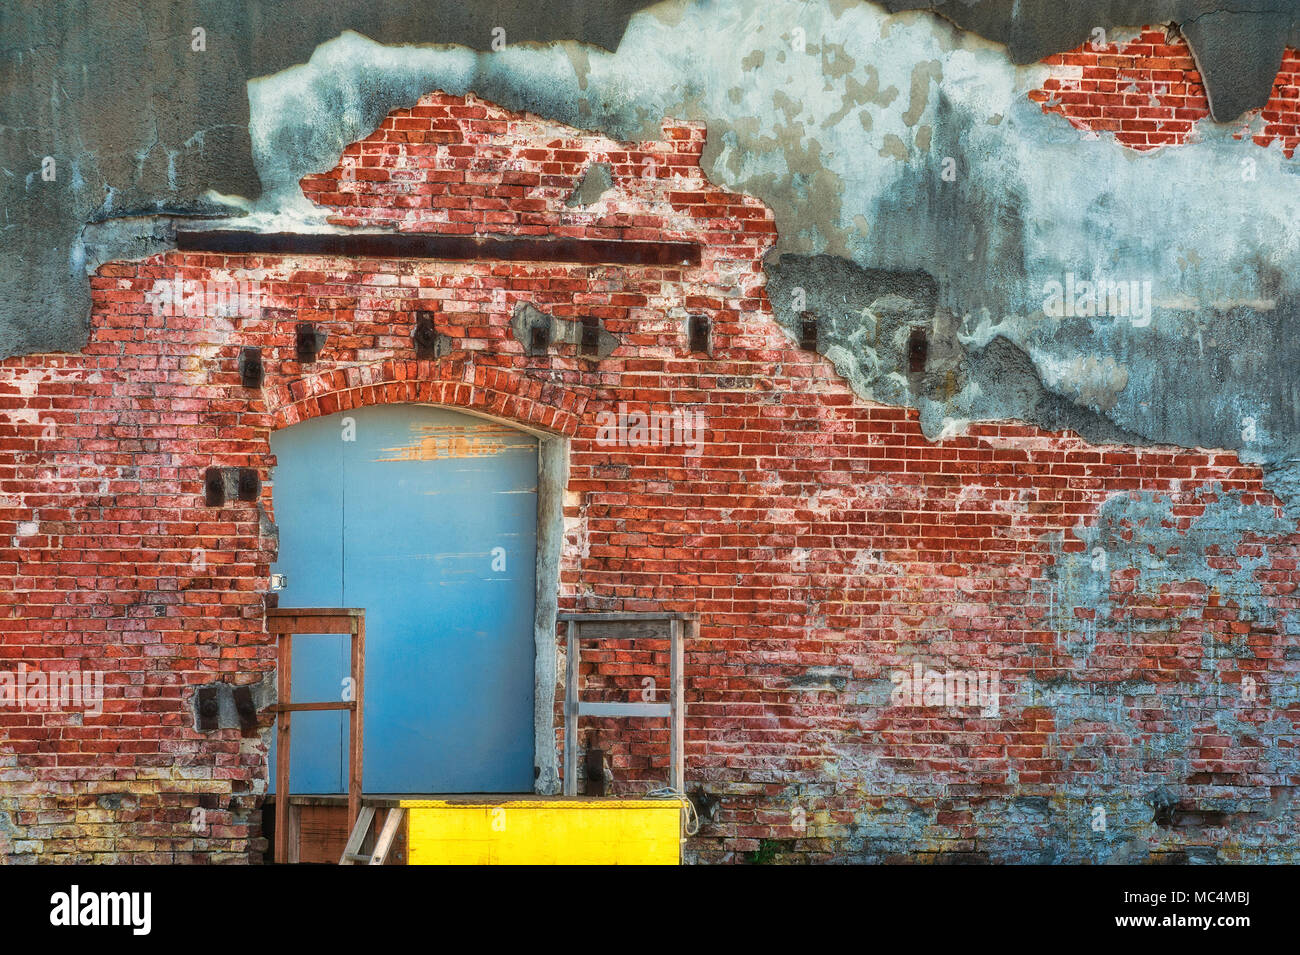 Loading dock on the backside of an old brick faced building Stock Photo